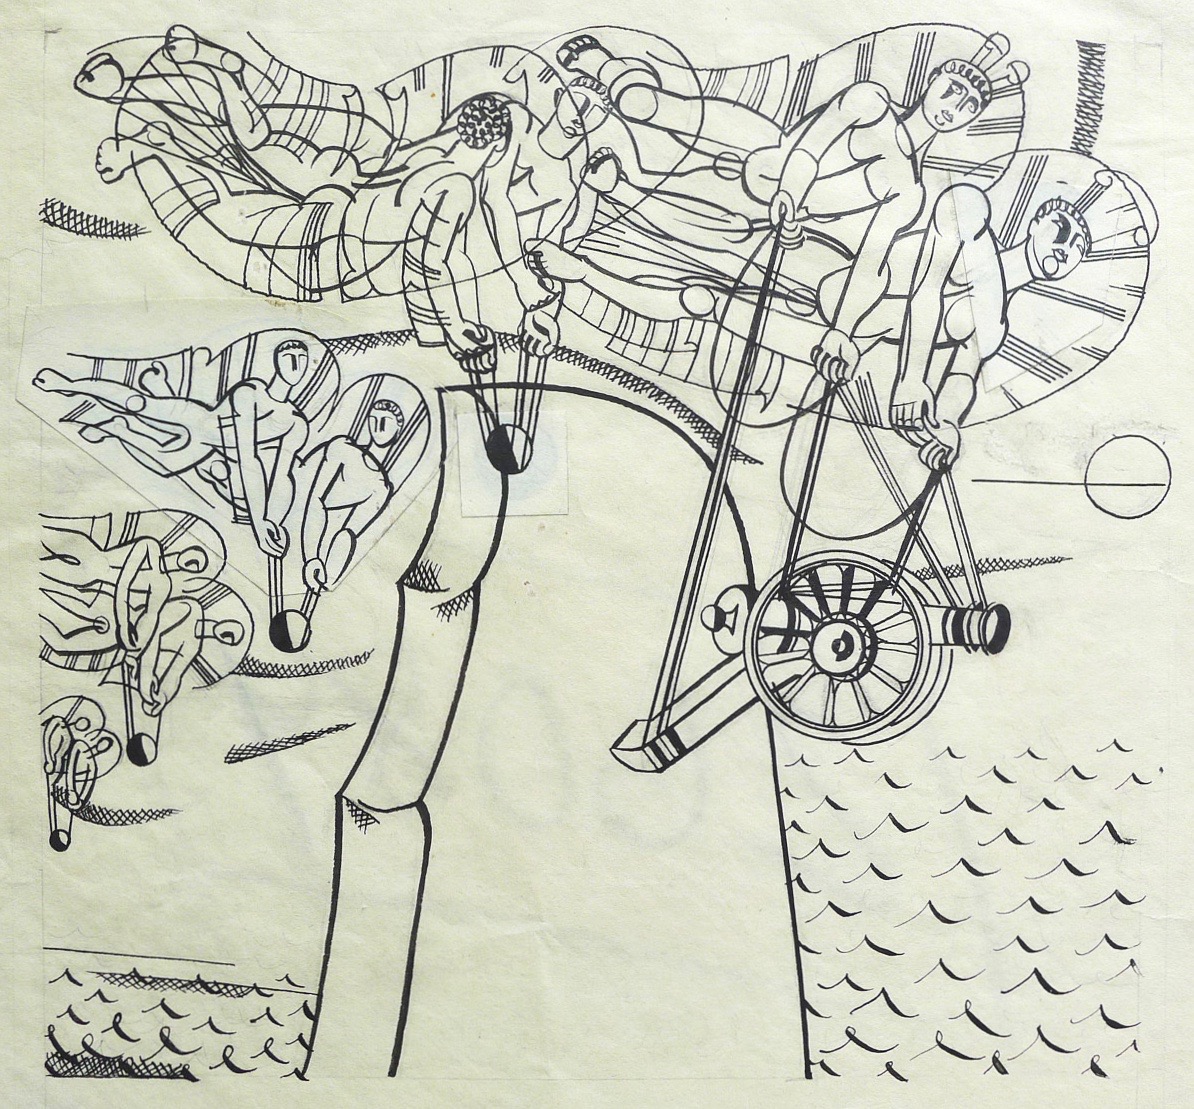 EDWARD BAWDEN RA [1903-1989]. Nasgig Transporting Cannon, 1928. brush and pen and ink drawing on